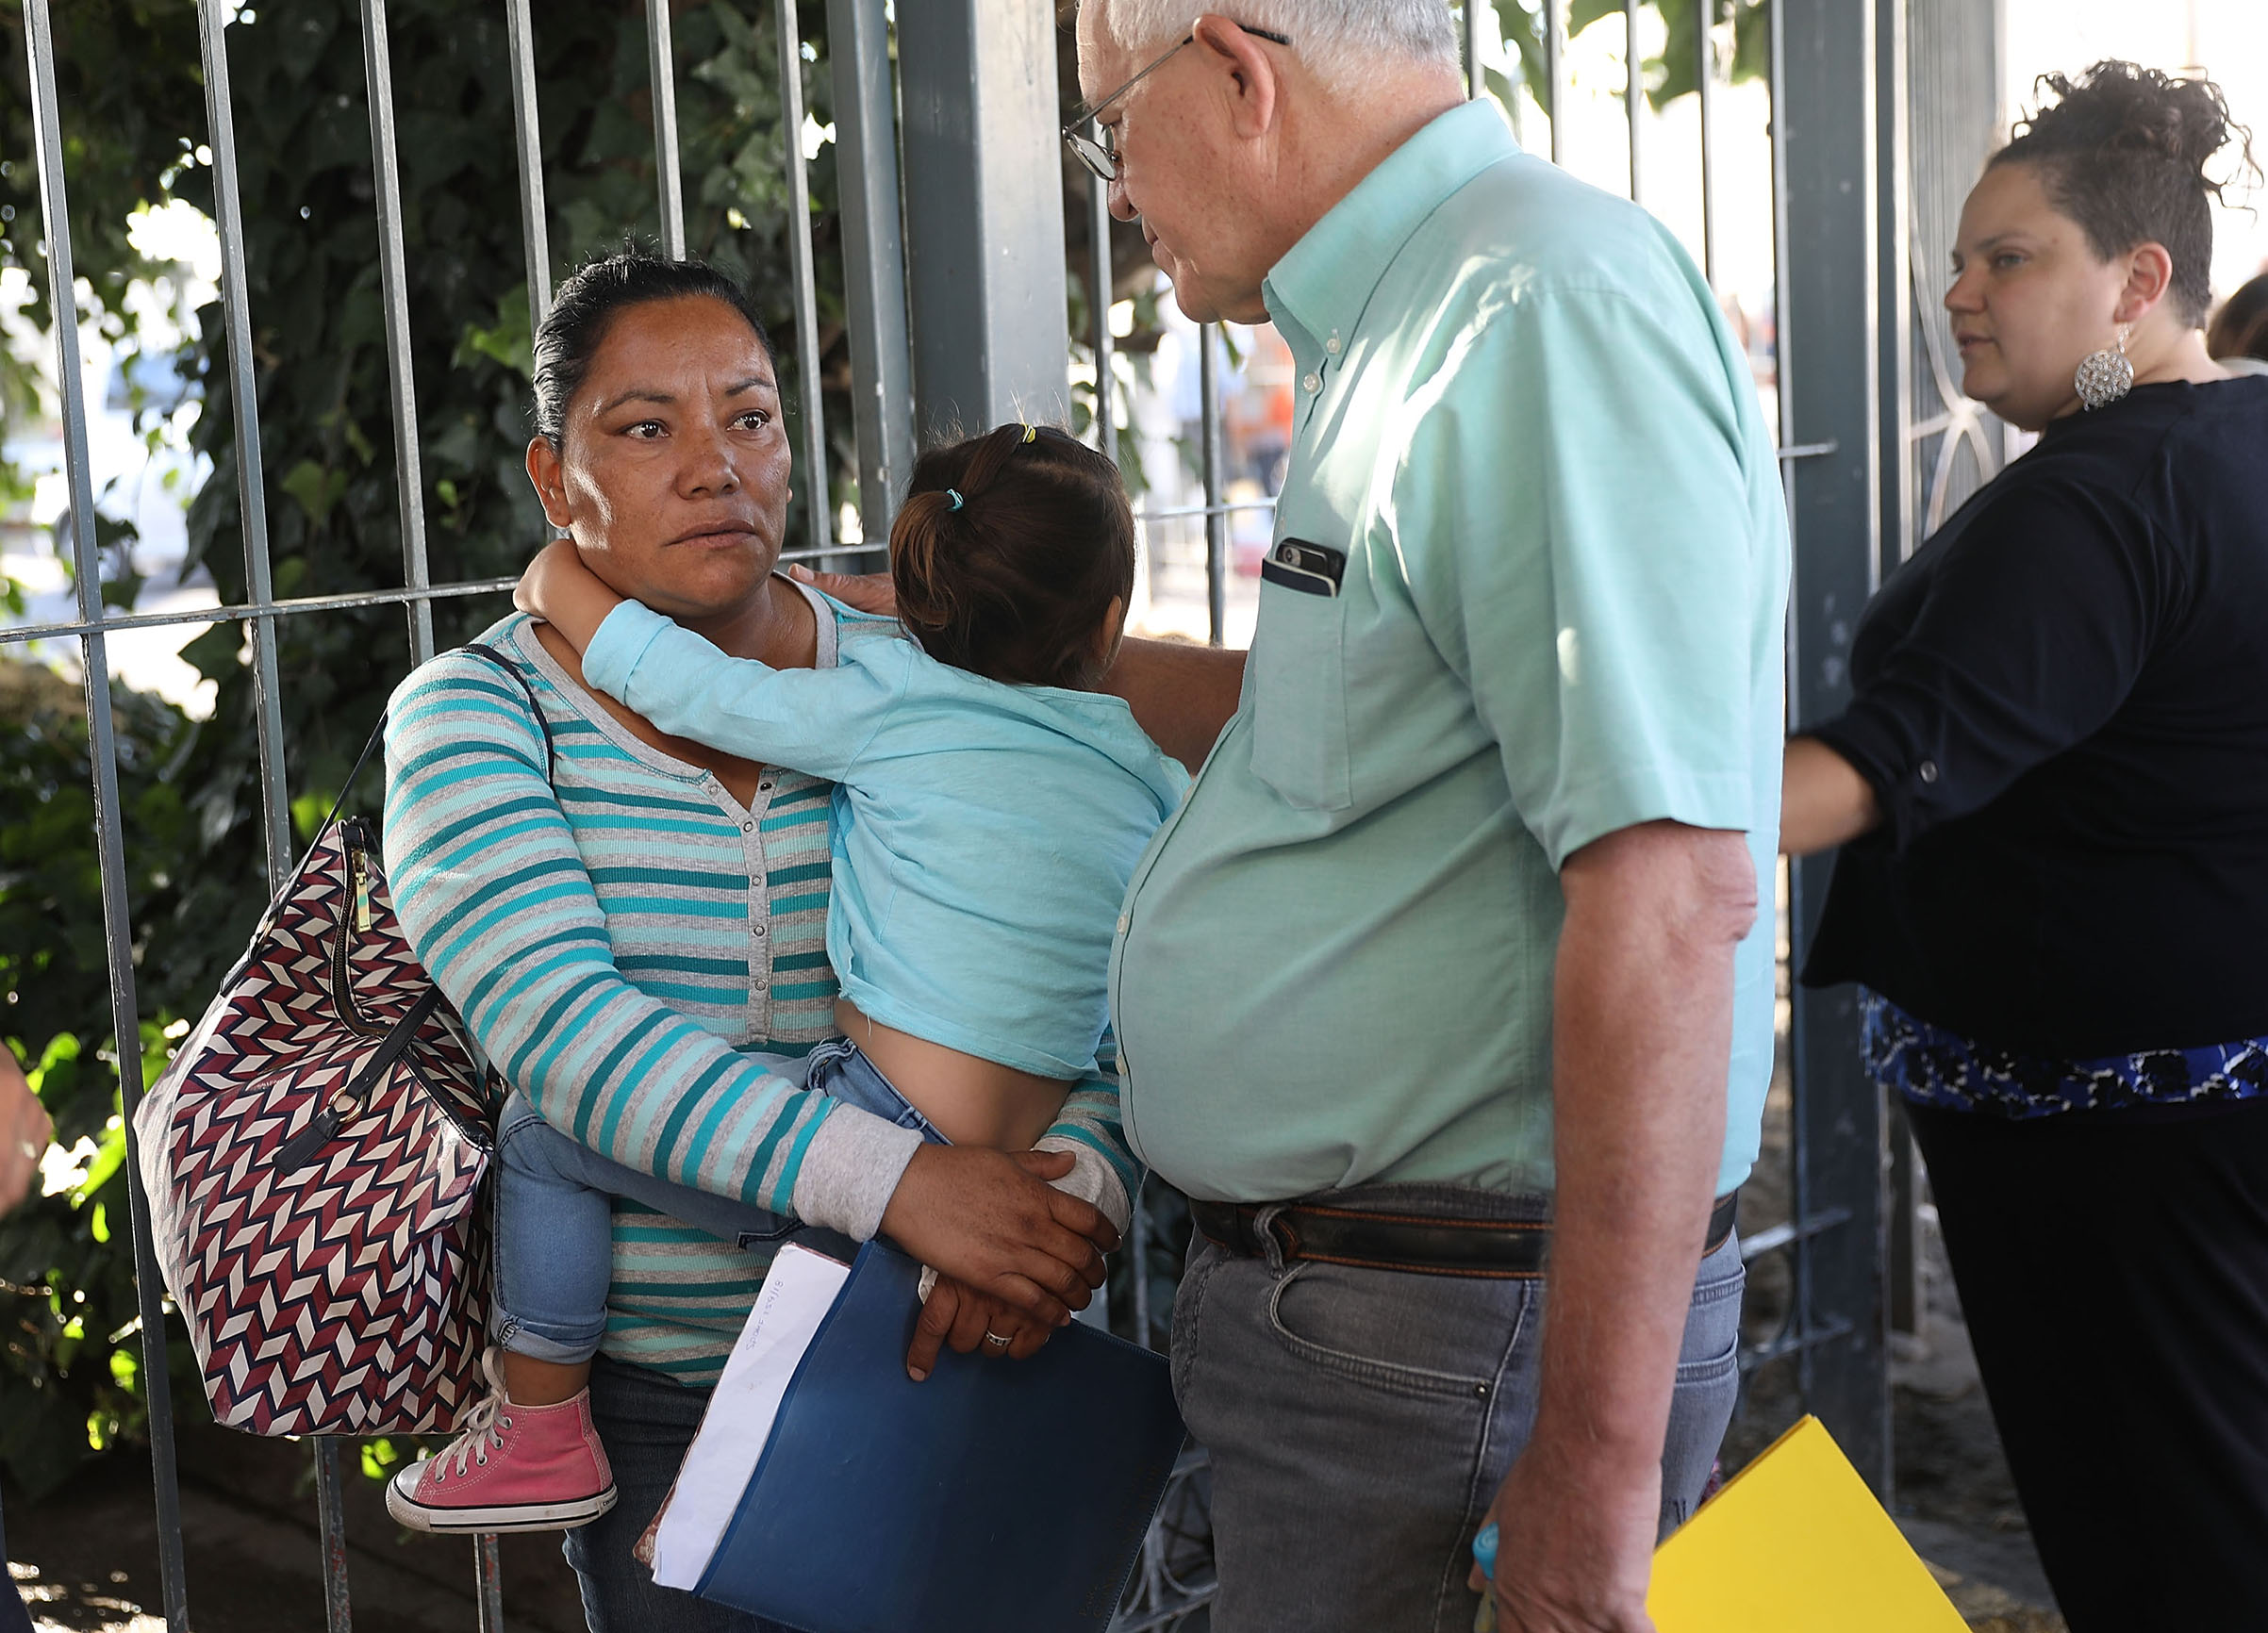 Ruben Garcia, director of the Annunciation House, speaks with Karla (who didn't want her last name used) before he helps her cross the Paso Del Norte Port of Entry to ask for asylum for herself and her grandchild in the United States on June 20, 2018 in Ciudad Juarez, Mexico. The Trump Administration's controversial zero tolerance immigration policy has led to an increase in the number of migrant children who have been separated from their families at the southern U.S. border. U.S. Attorney General Jeff Sessions has added that domestic and gang violence in immigrants' country of origin would no longer qualify them for political asylum status. (Joe Raedle—Getty Images)